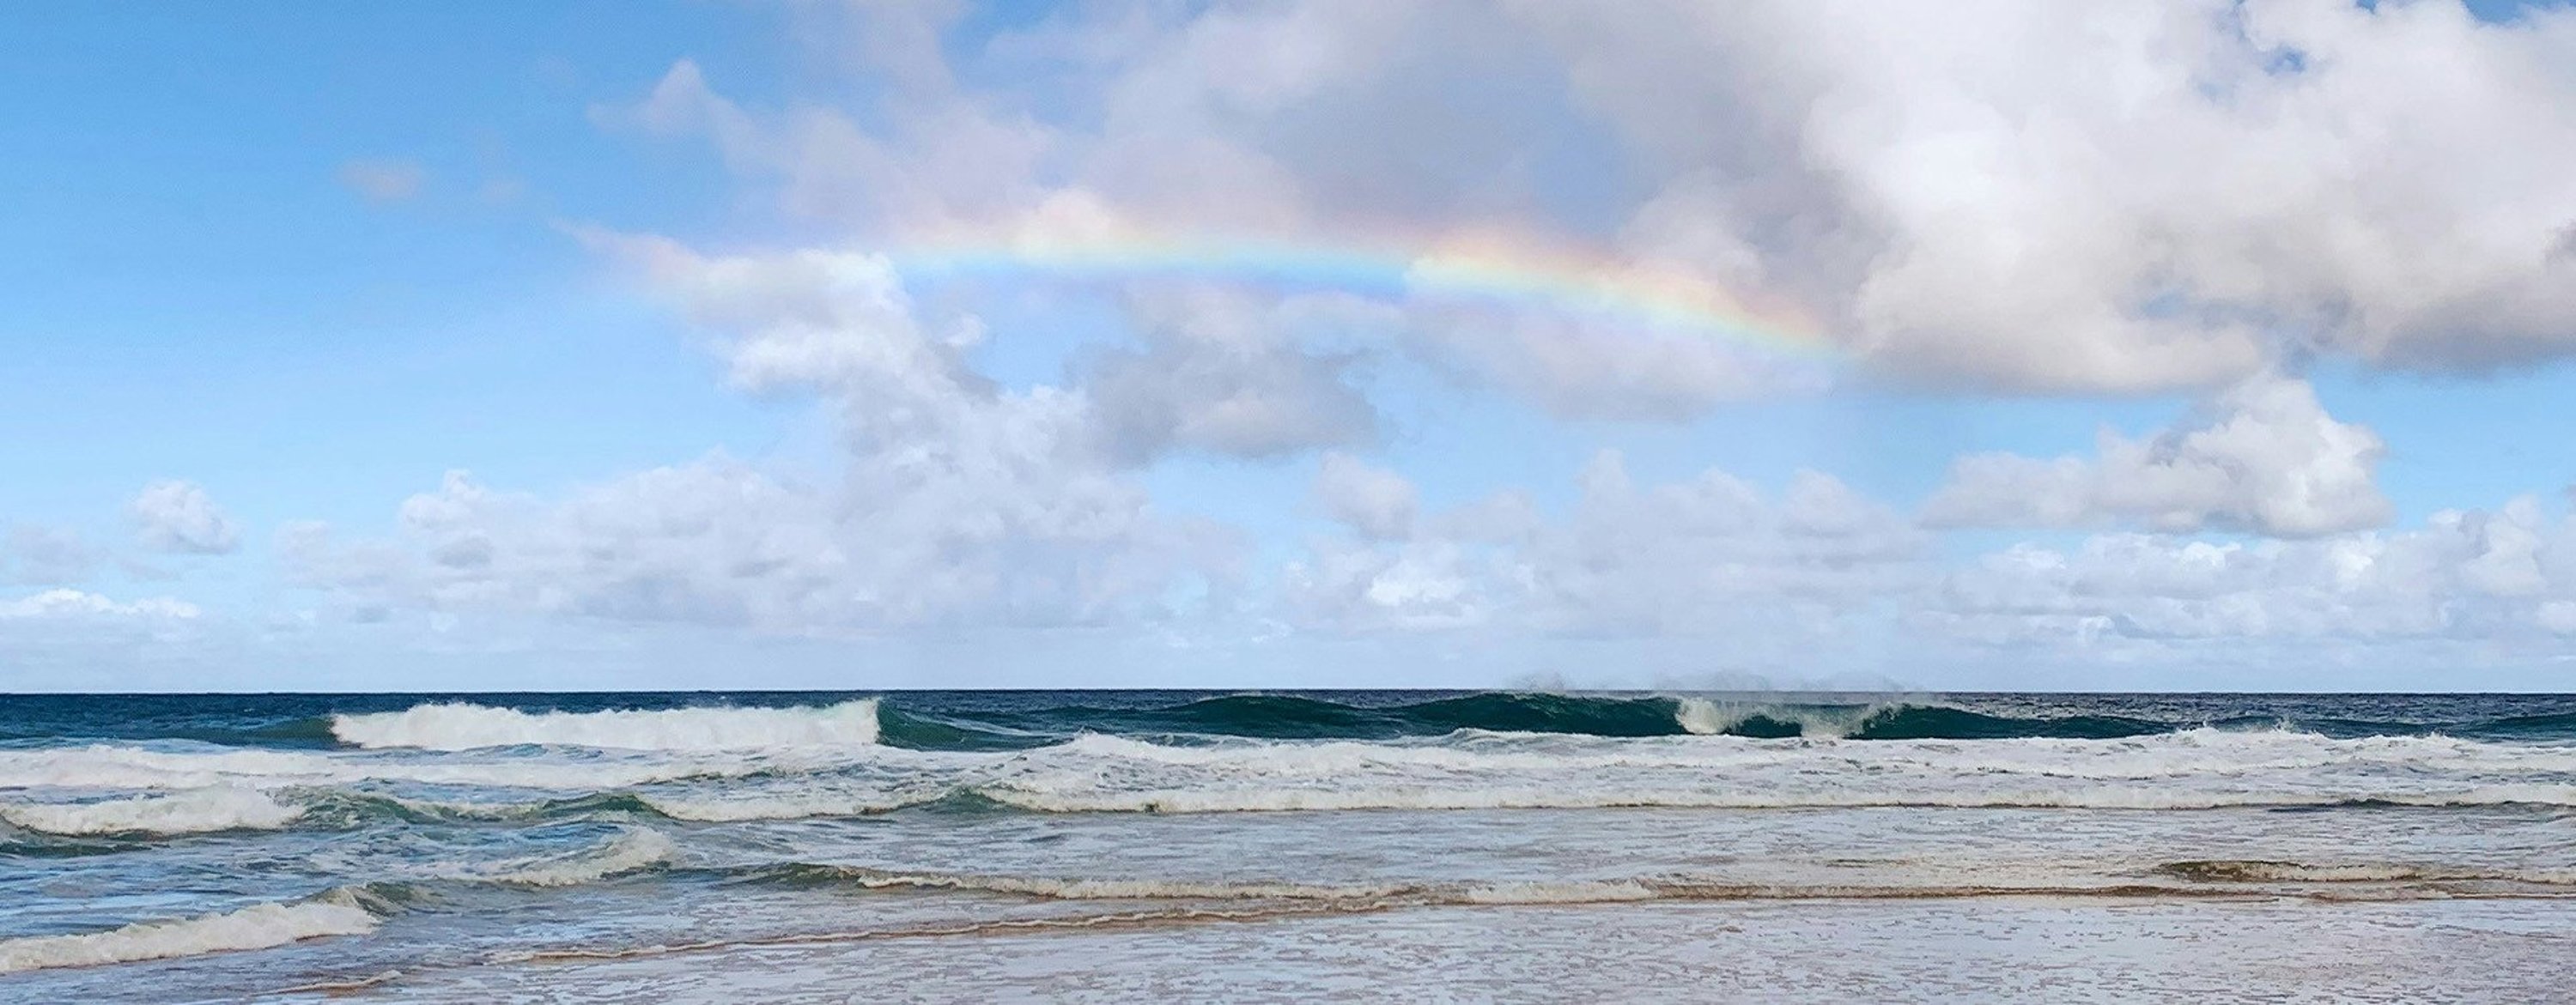 a rainbow forms above the breaking waves at the beach